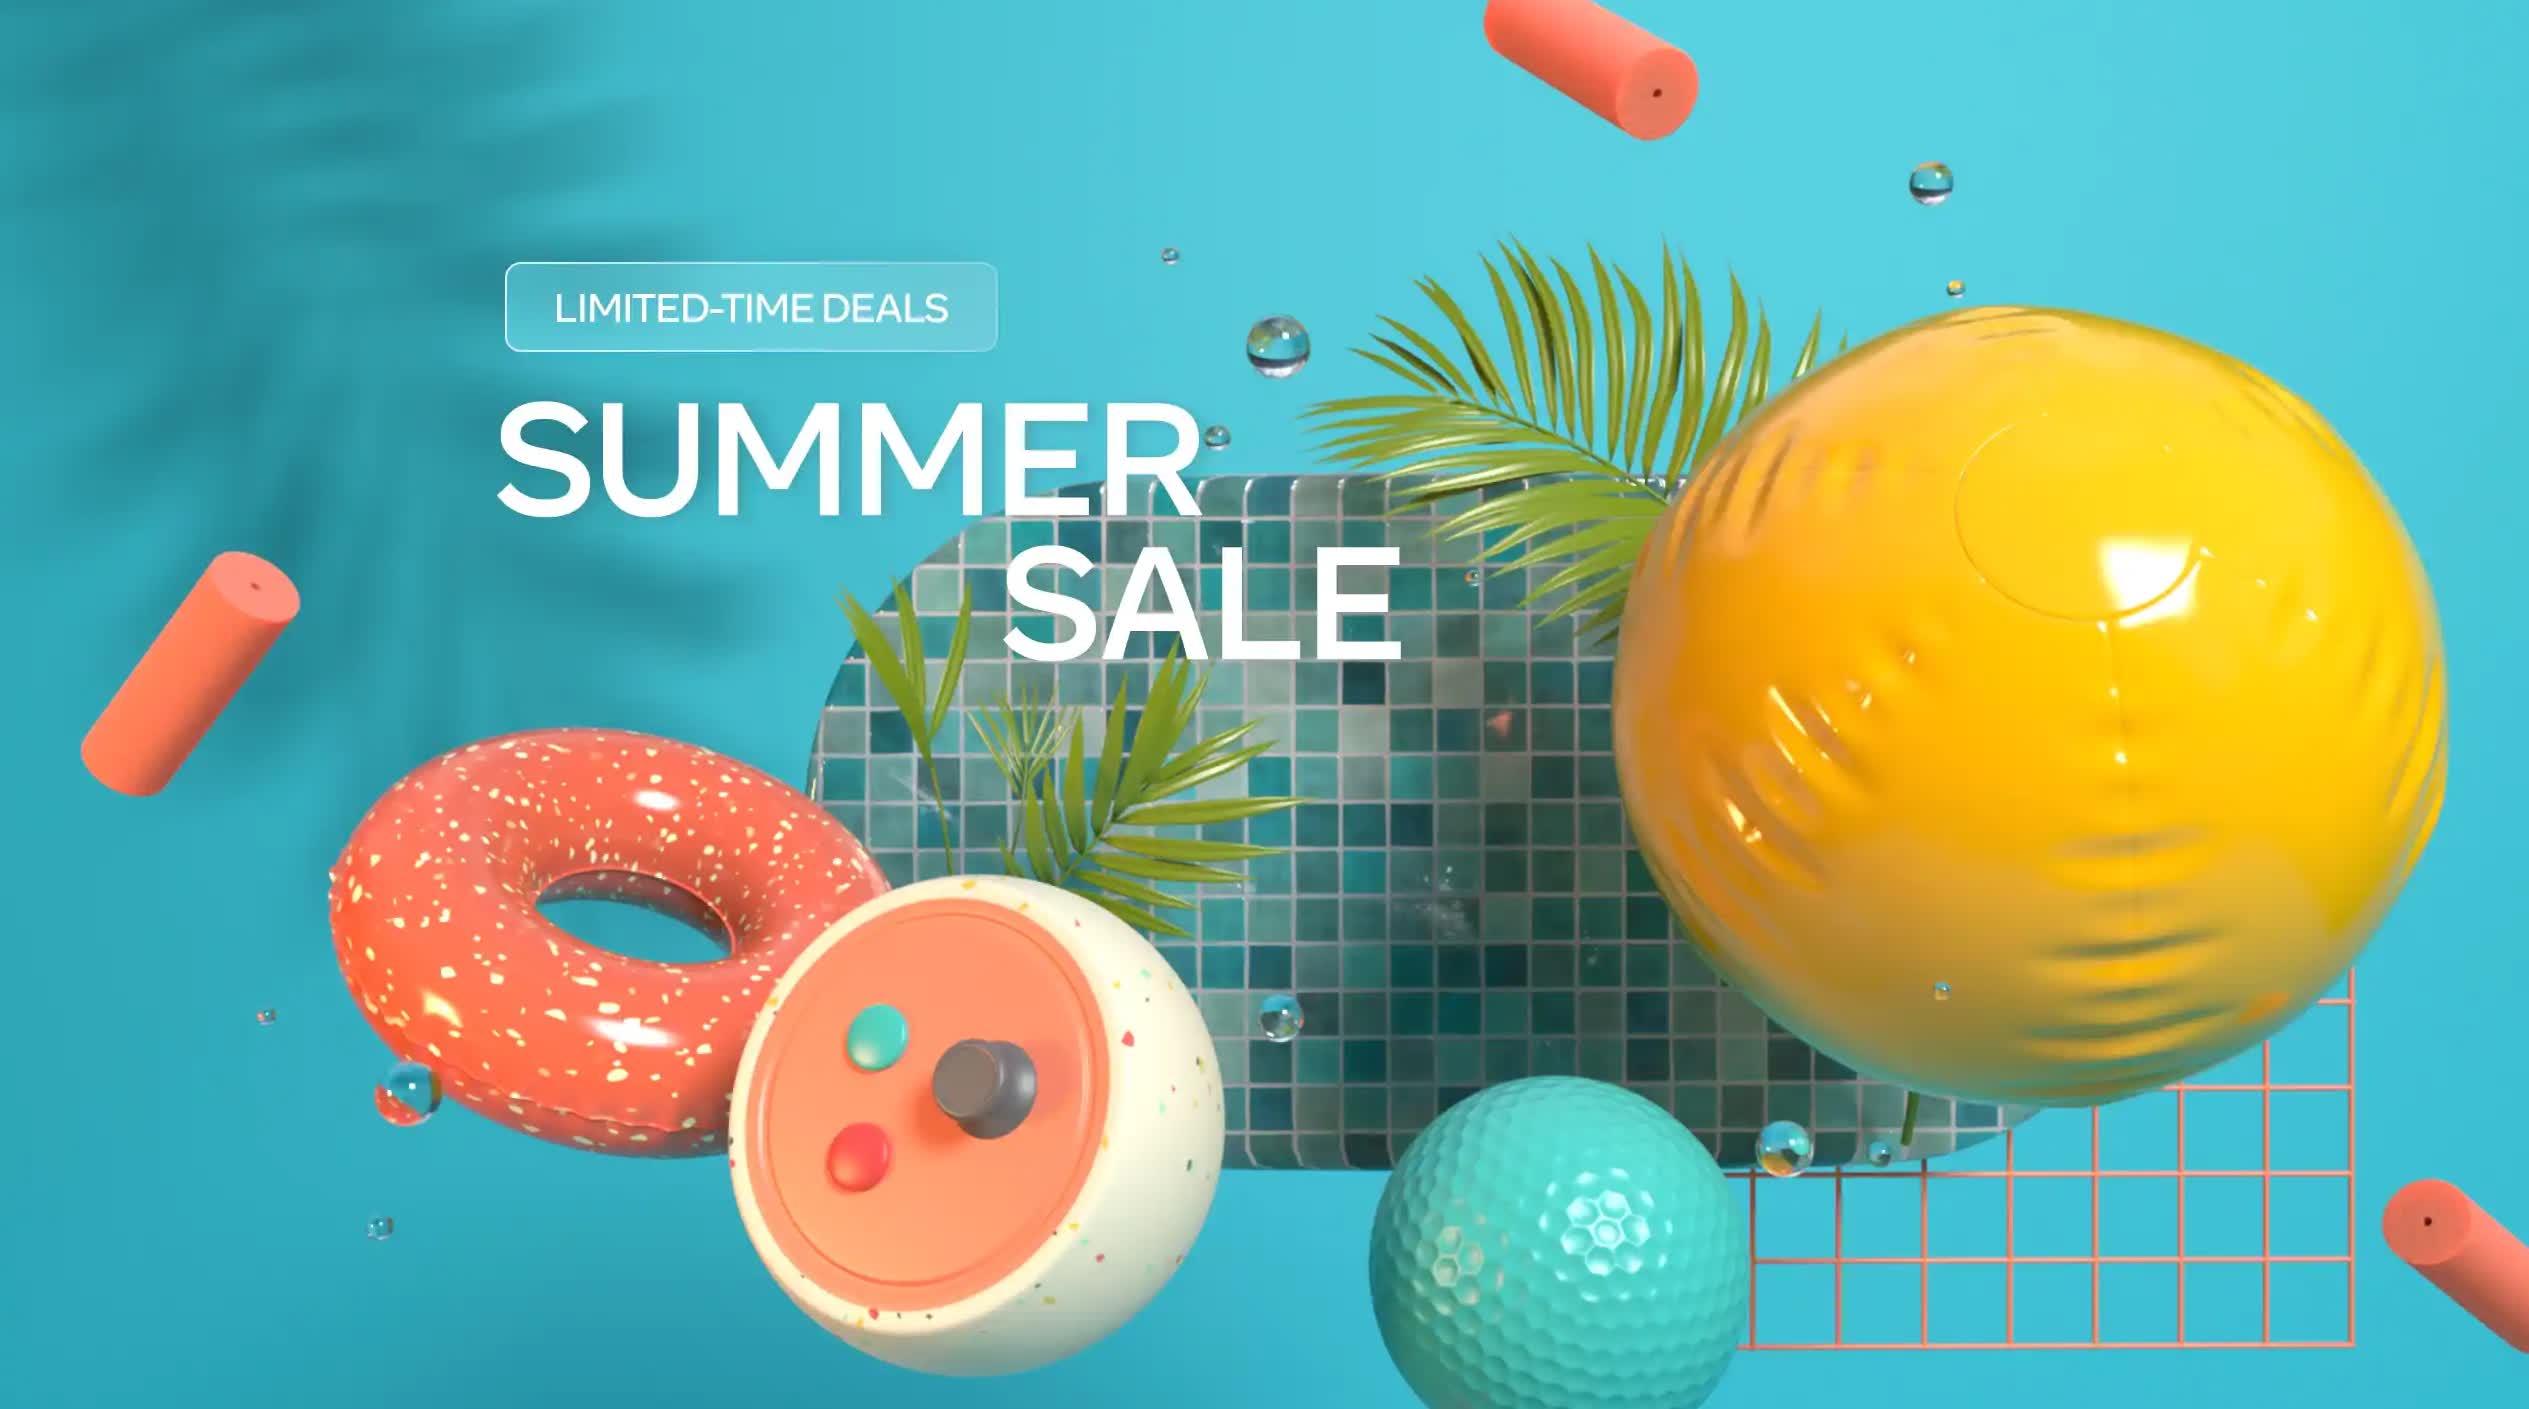 Meta's Oculus Quest Summer Sale goes live with up to 40% off select VR games and apps